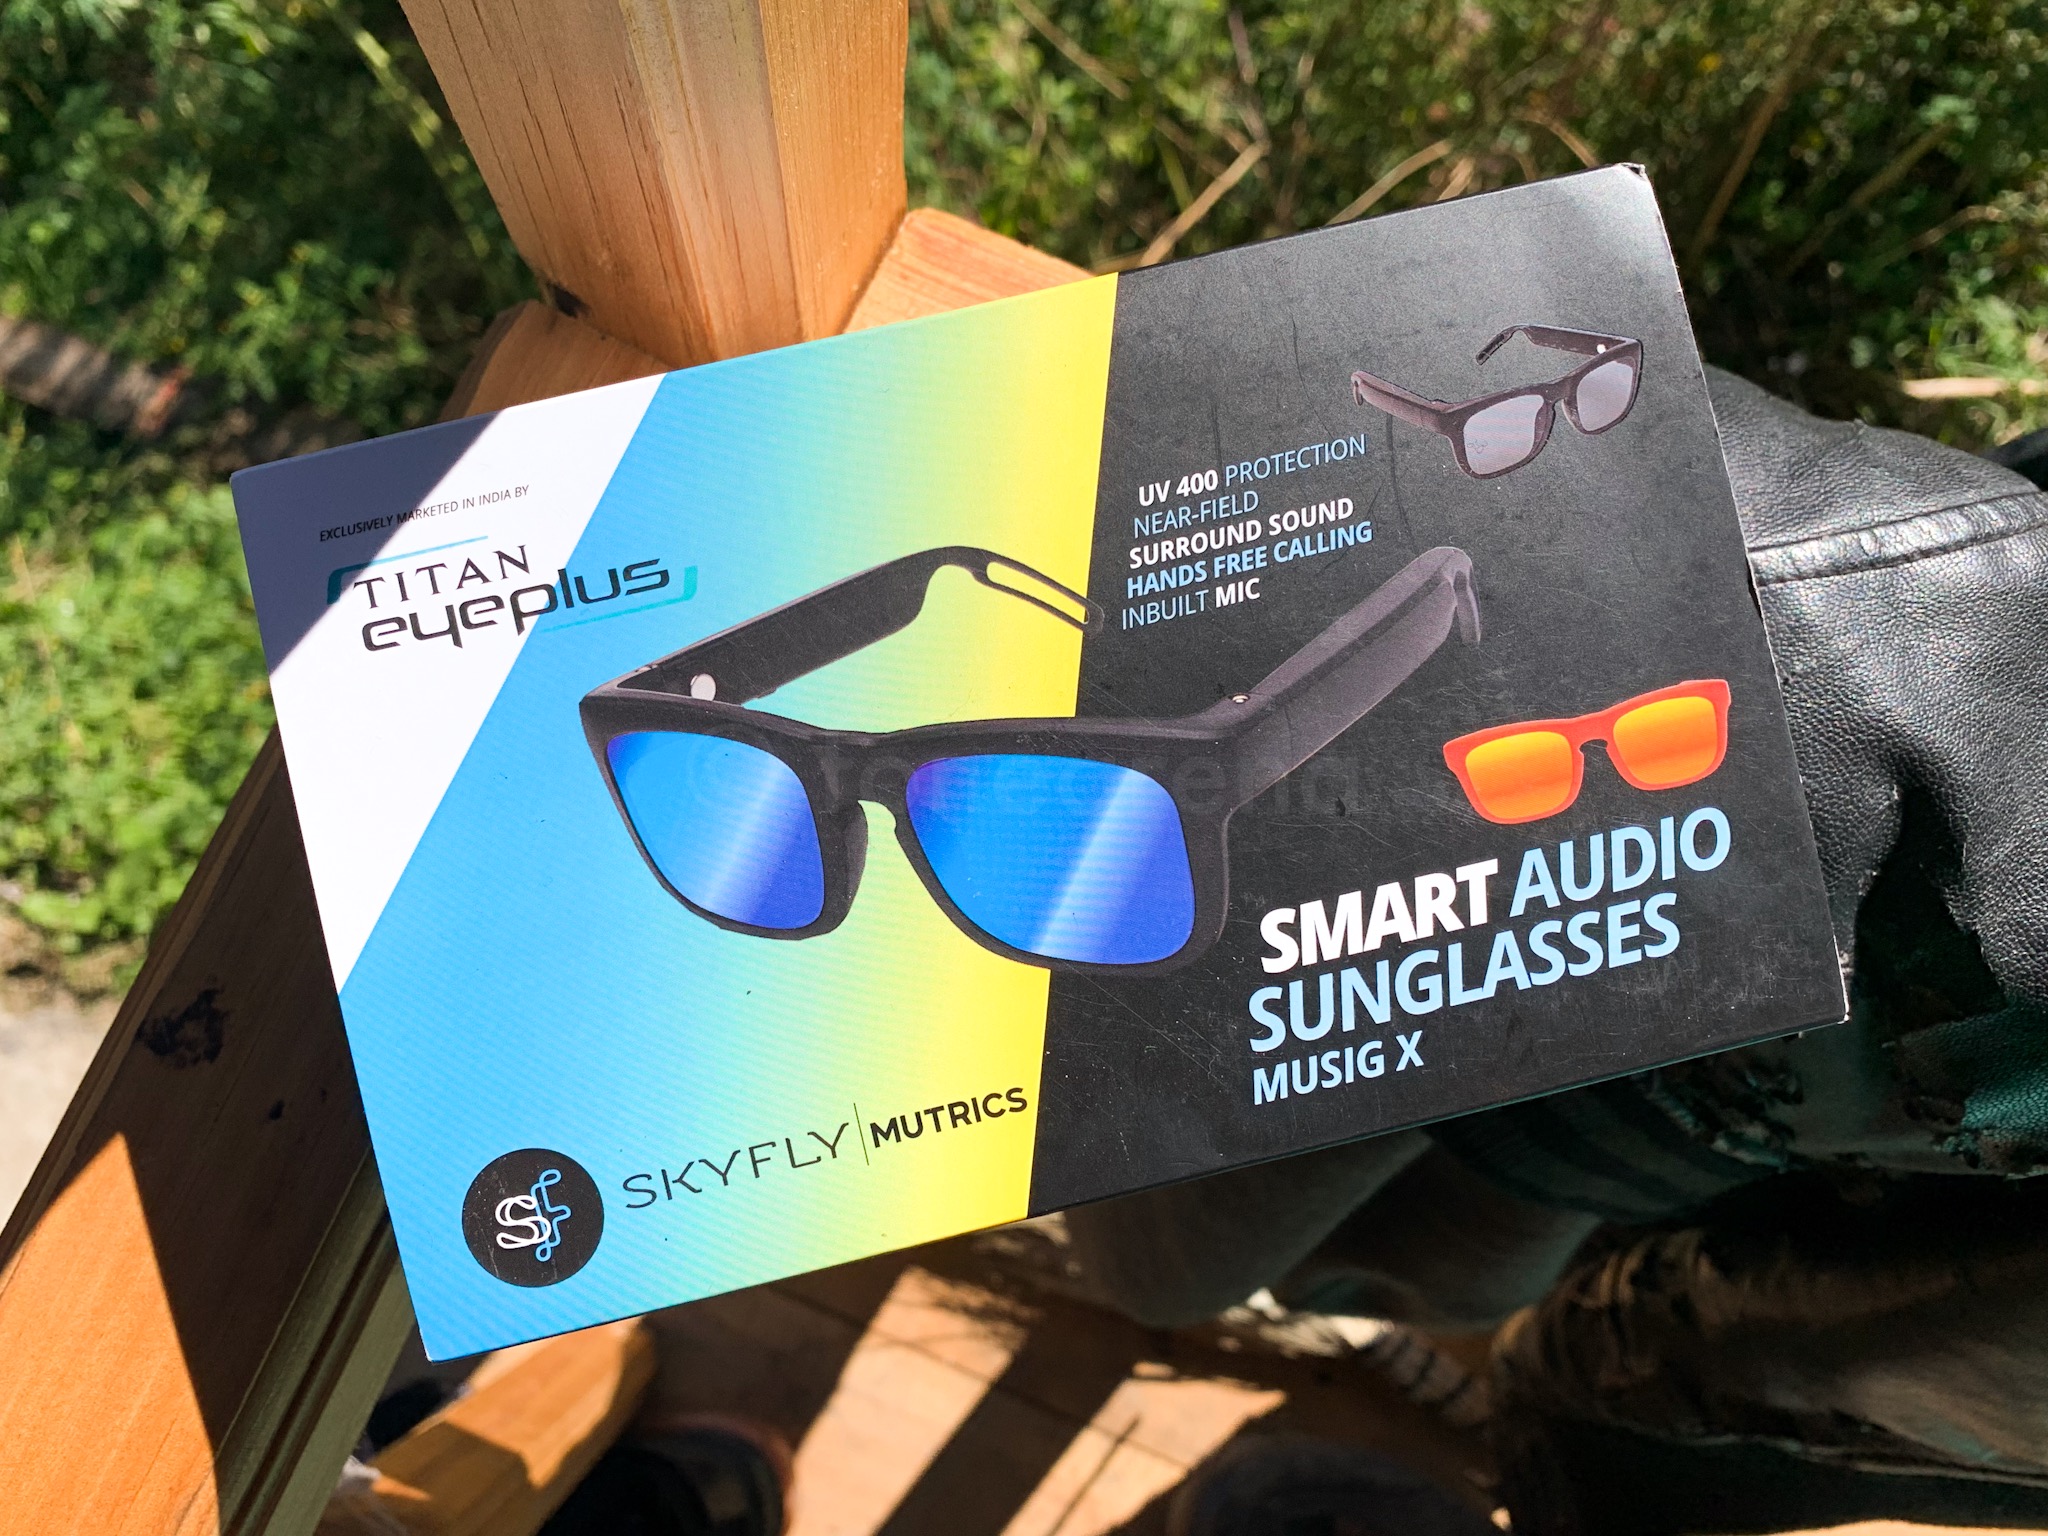 Titan Eyeplus Smart Audio Sunglasses Musig X Unboxing And First Impressions